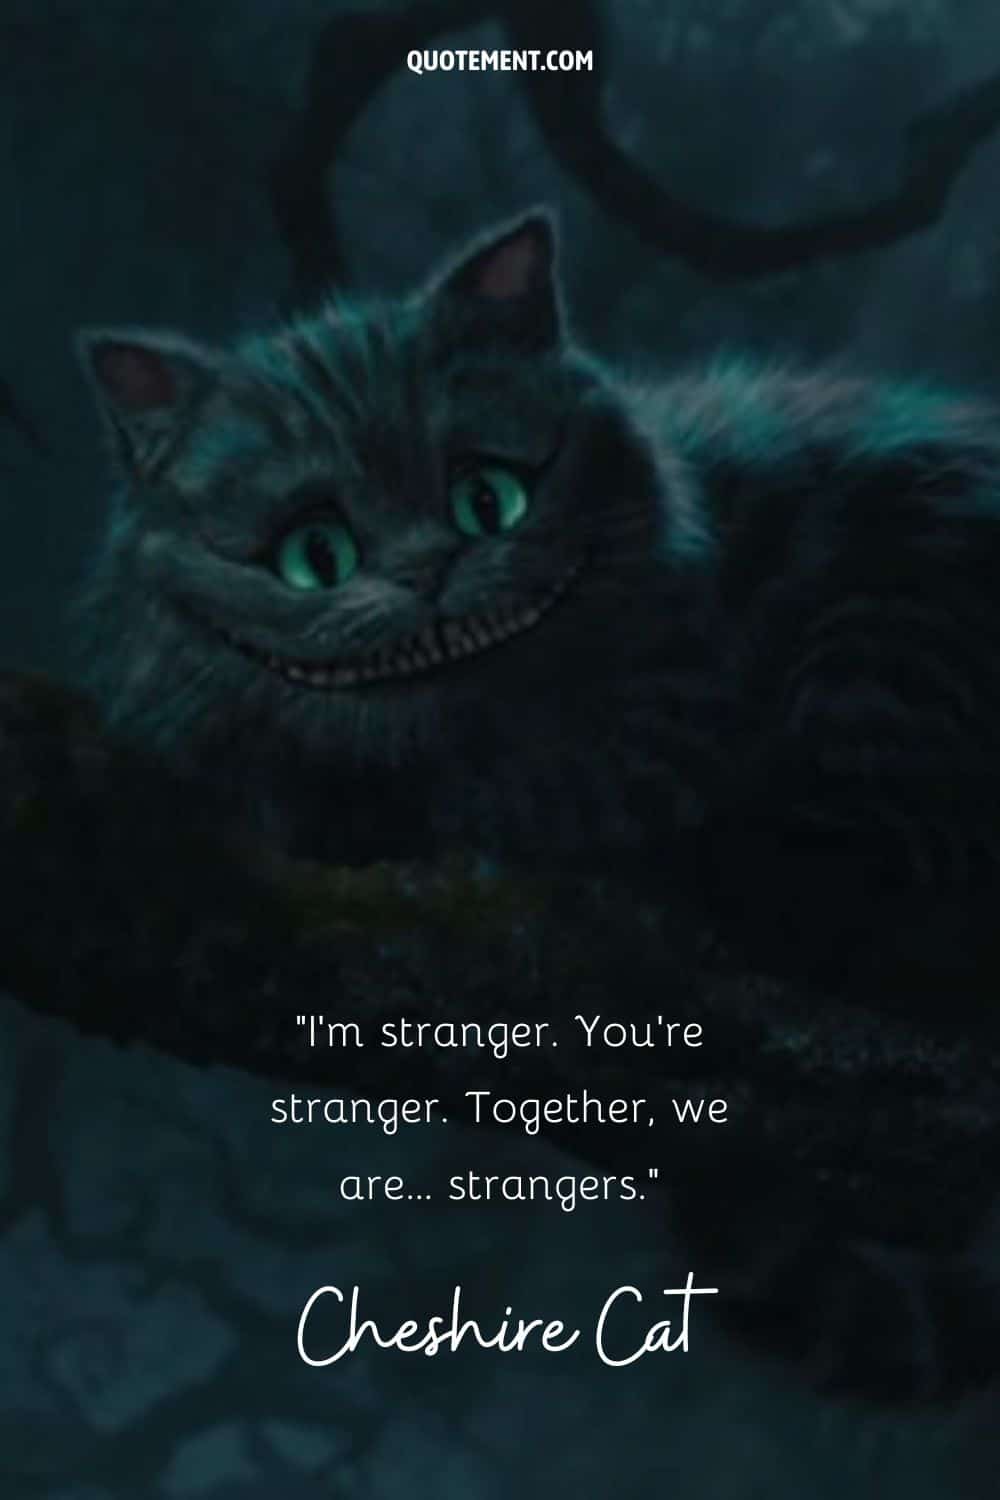 Deep Cheshire Cat quote represented by the image of the cat